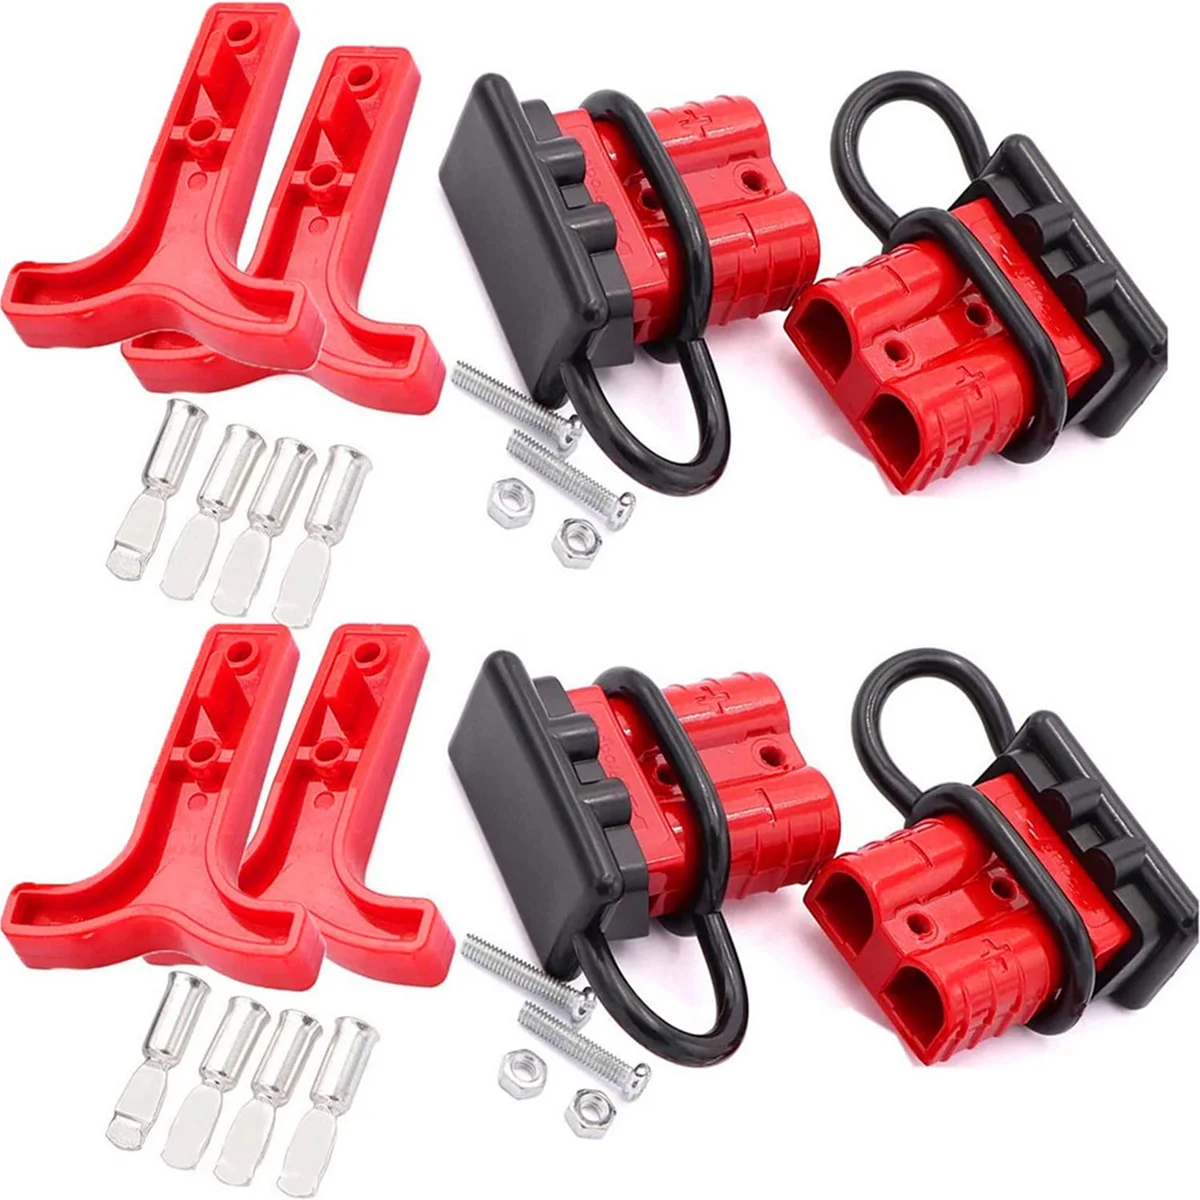 

4Set 600V 50A Battery Power Quick Connector Terminal Kit Connect Plug Disconnect Winch Trailer Connect Red